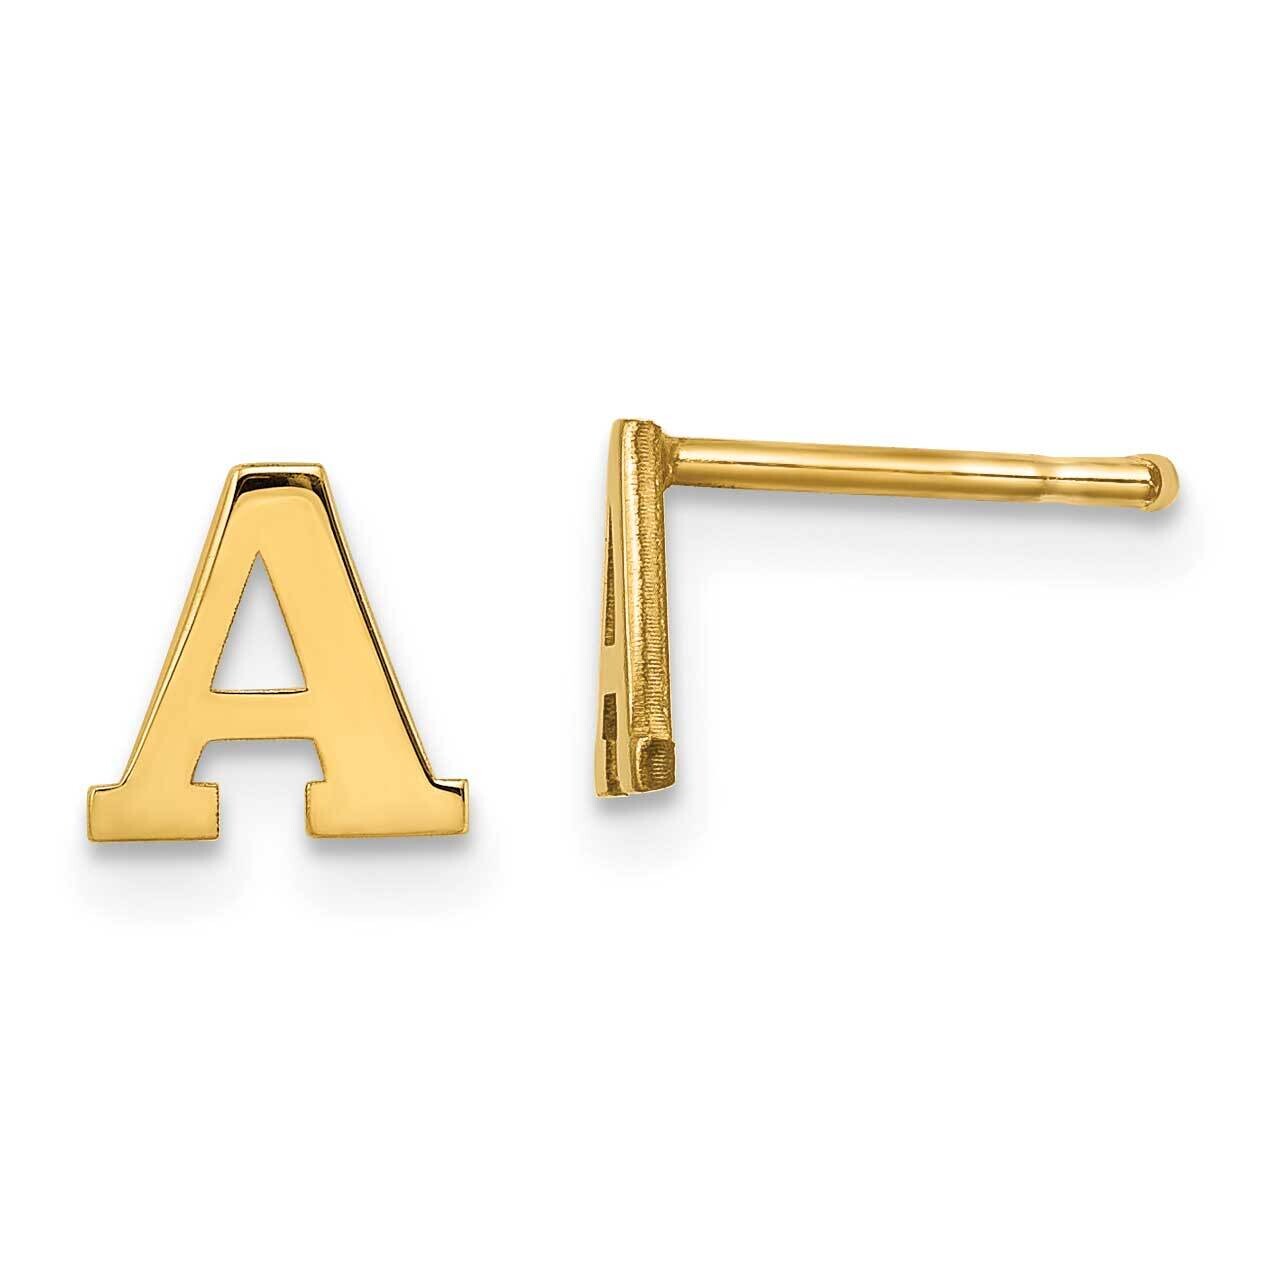 Gold-Plated Letter A Initial Post Earrings Sterling Silver XNE46GP/A